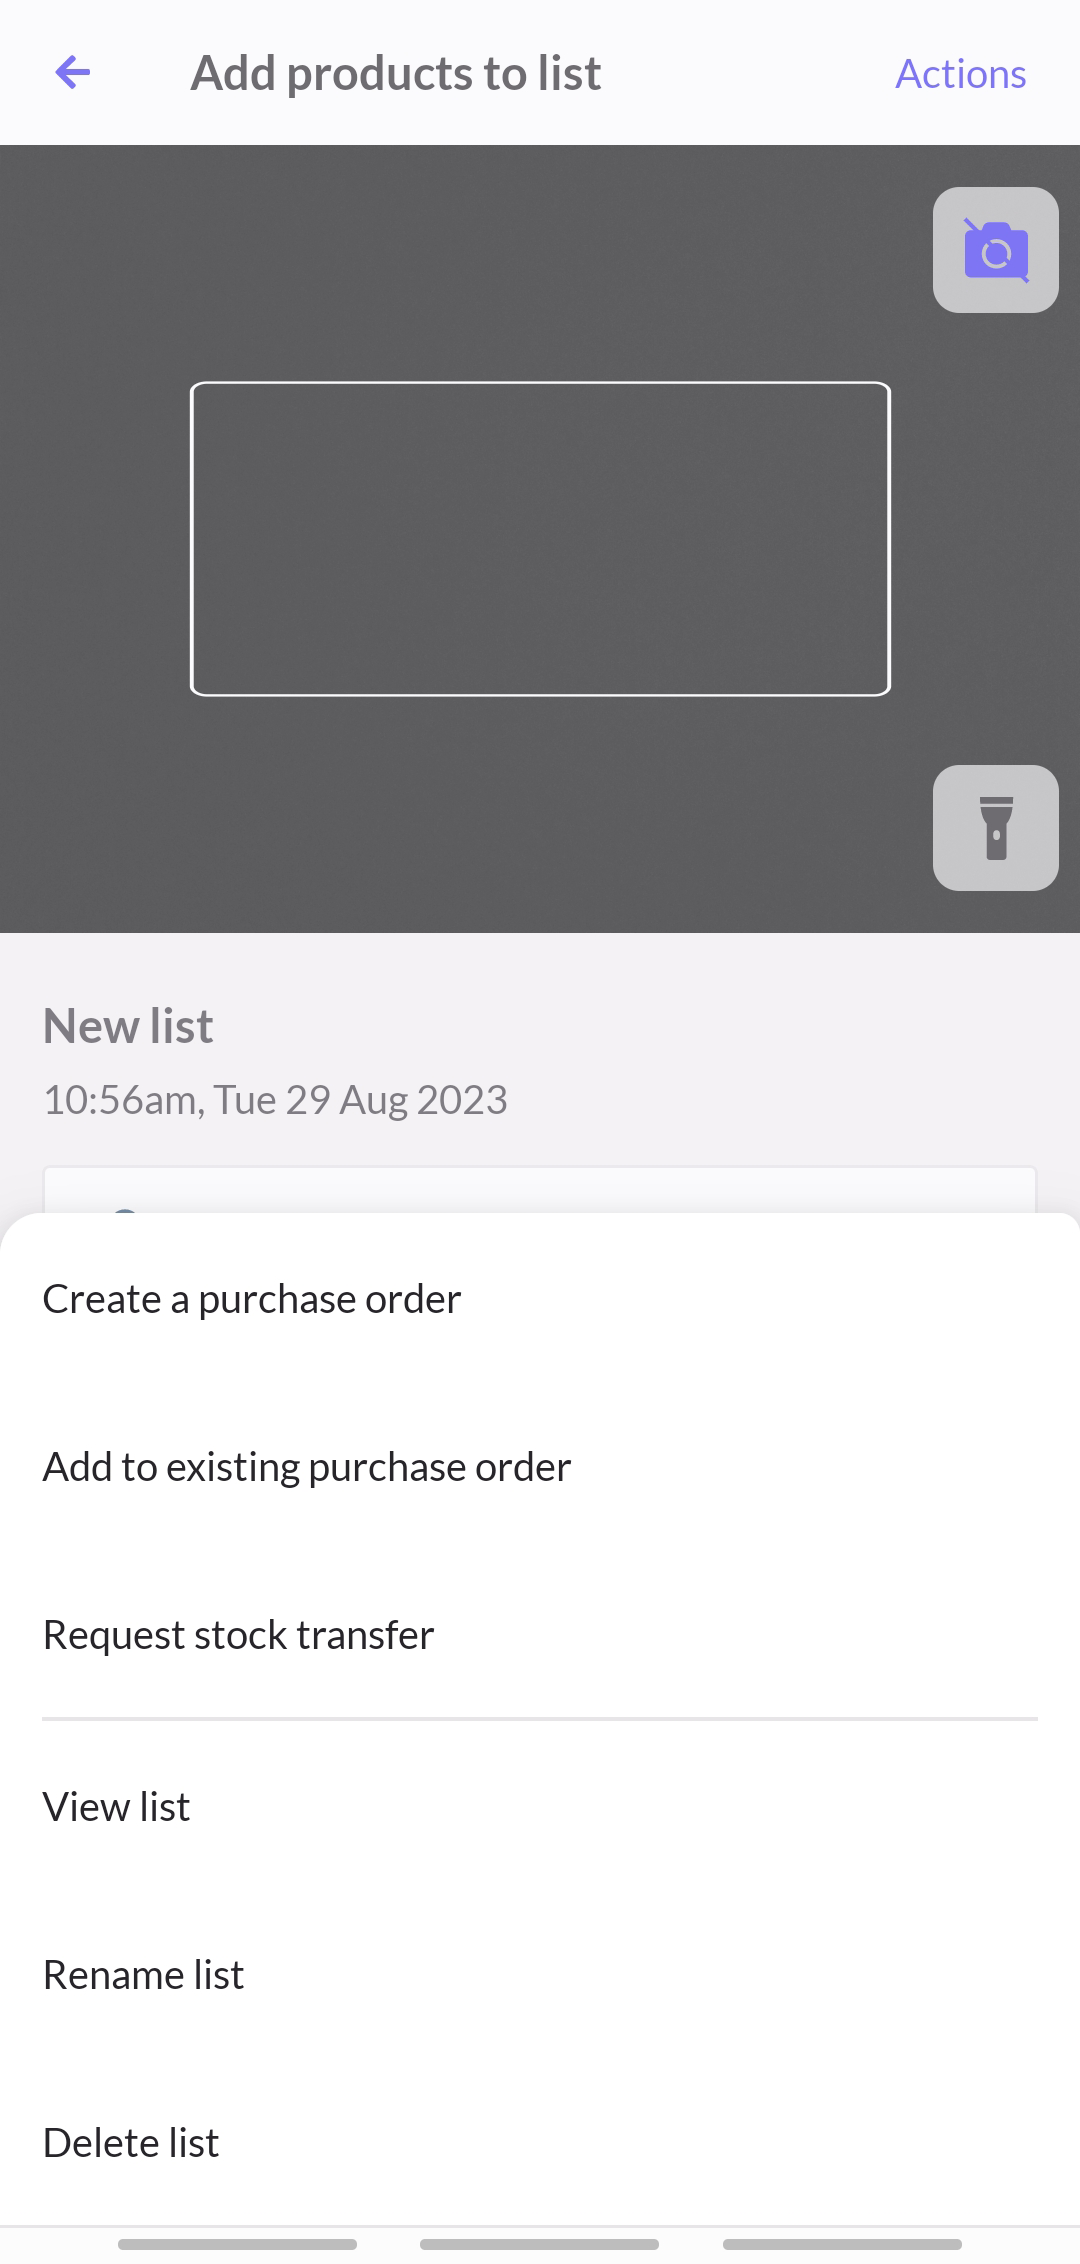 Tapping Actions and then selecting Request stock transfer